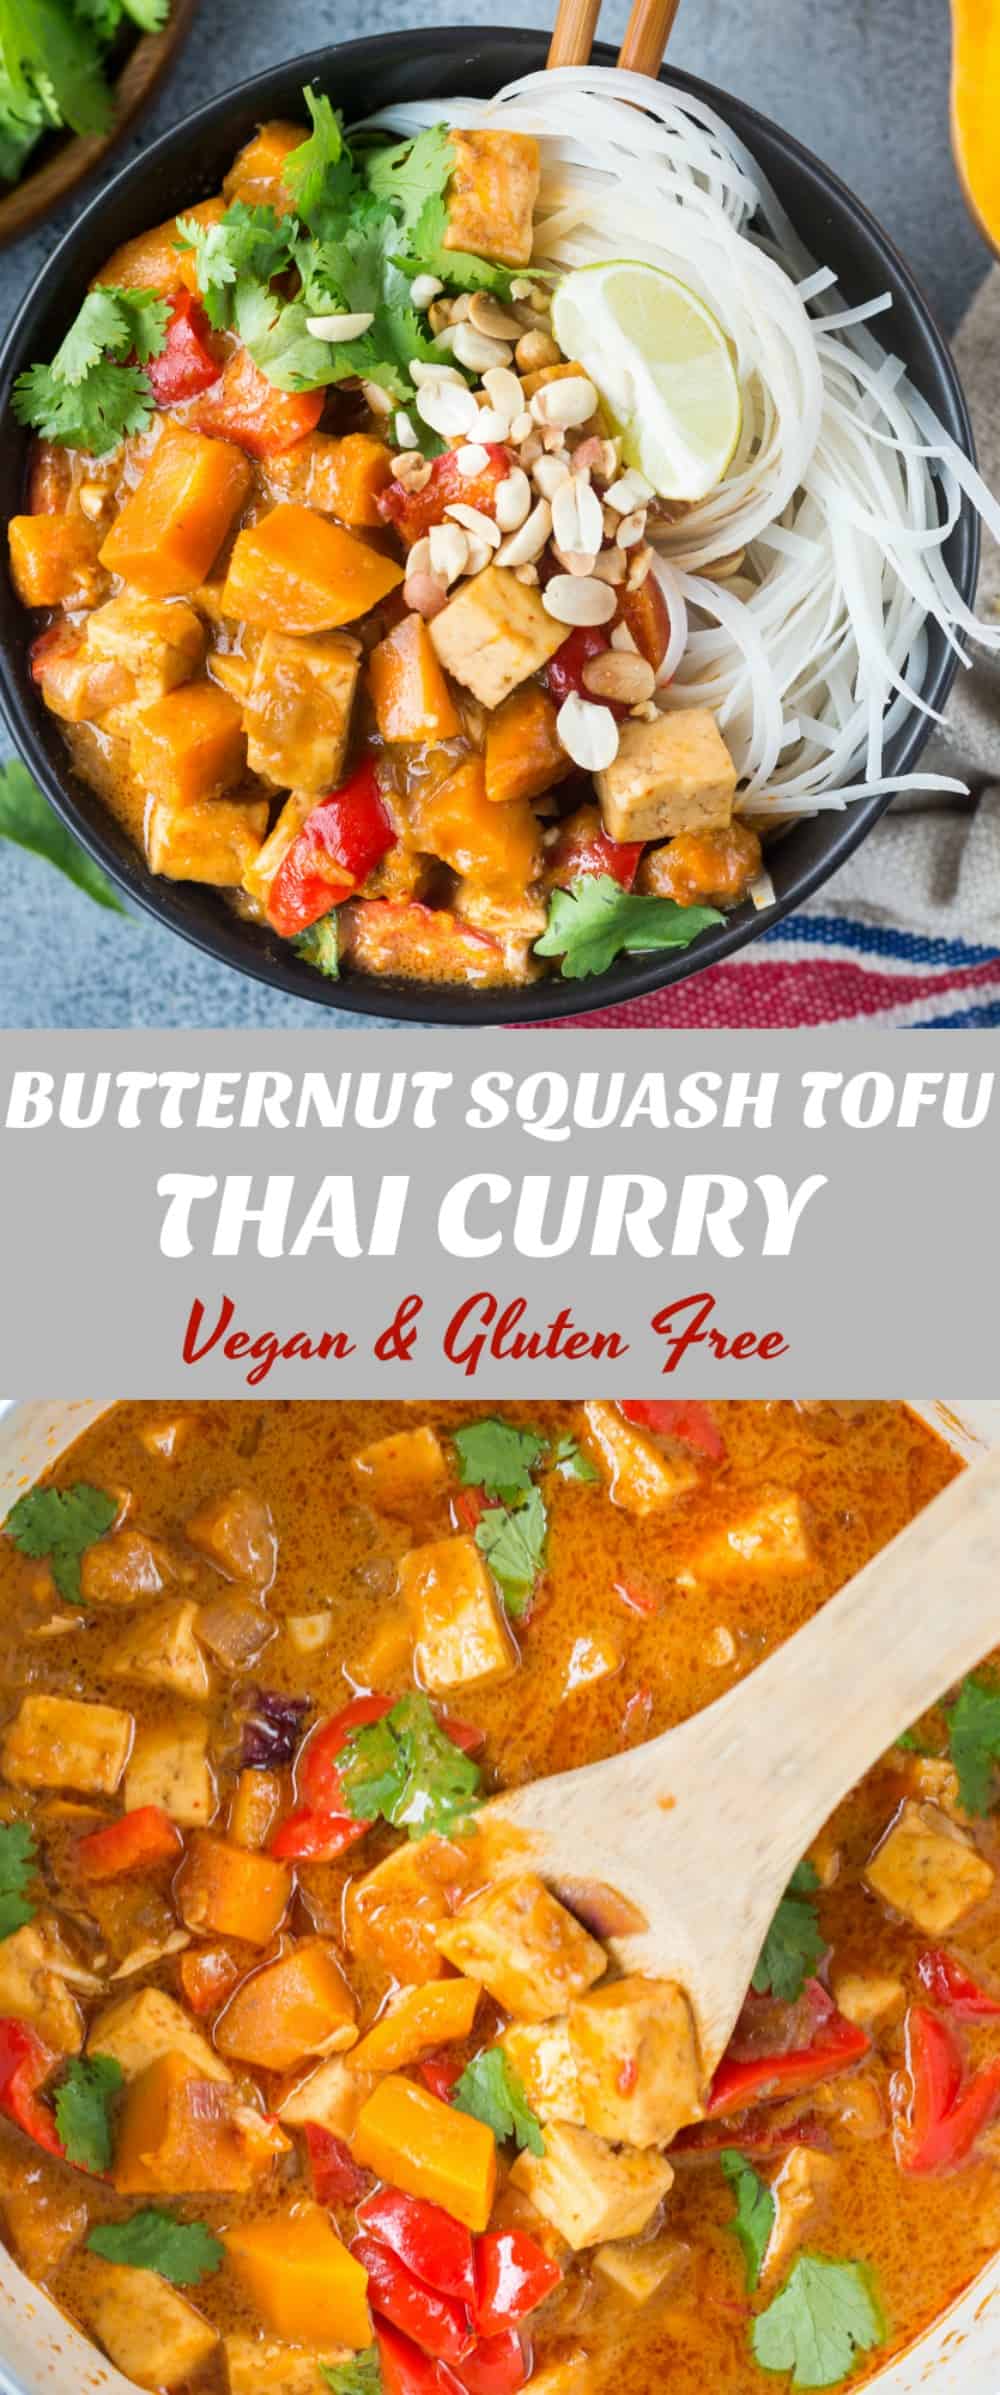 Pin collage. first image of thai butternut squash curry with tofu served in a bowl with noodles. Second image of creamy butternut squash curry